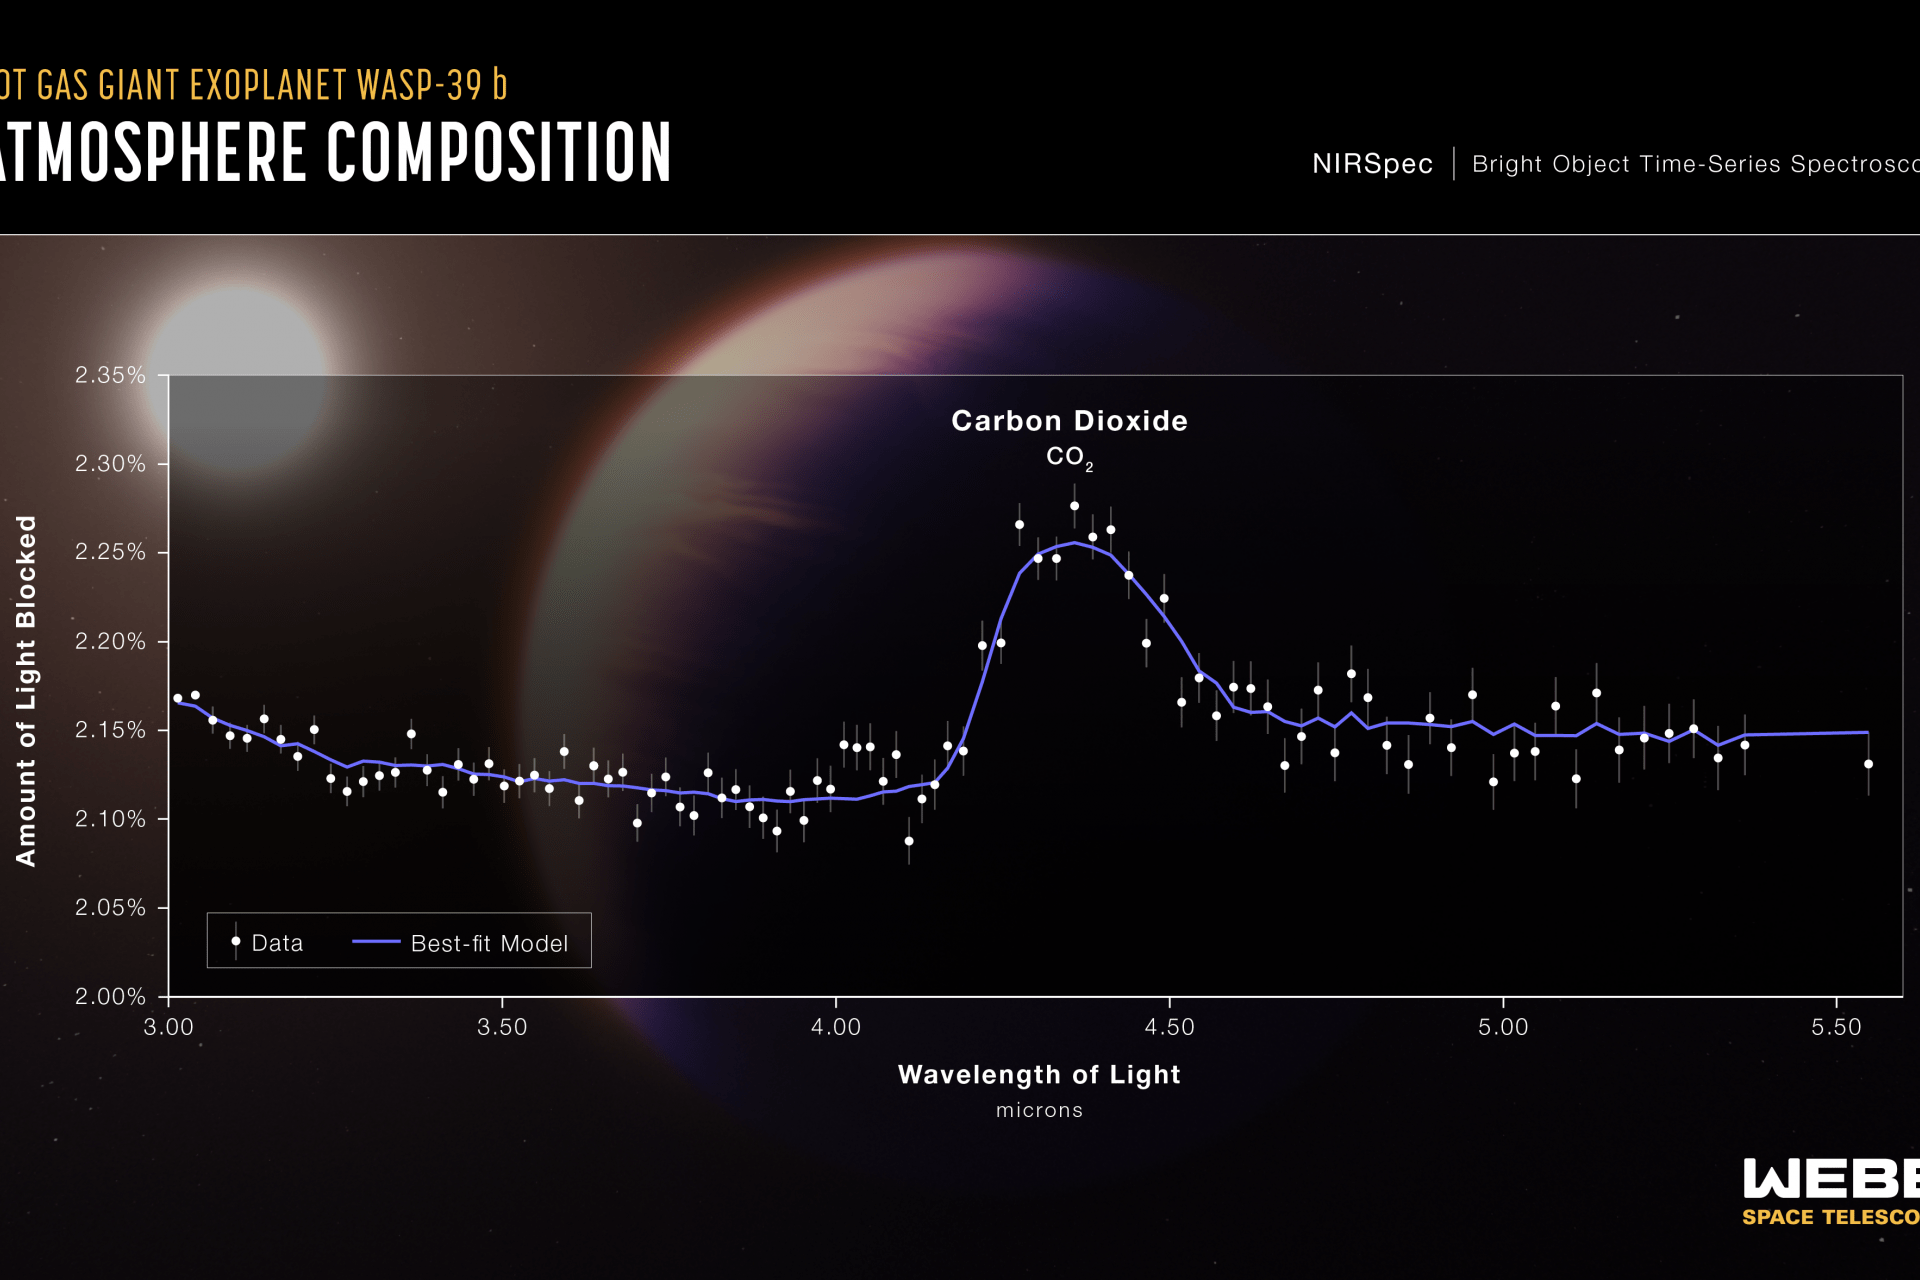 Graph of the transmission spectrum from James Webb of WASP-39b's atmosphere, showing prominently the peak for carbon dioxide